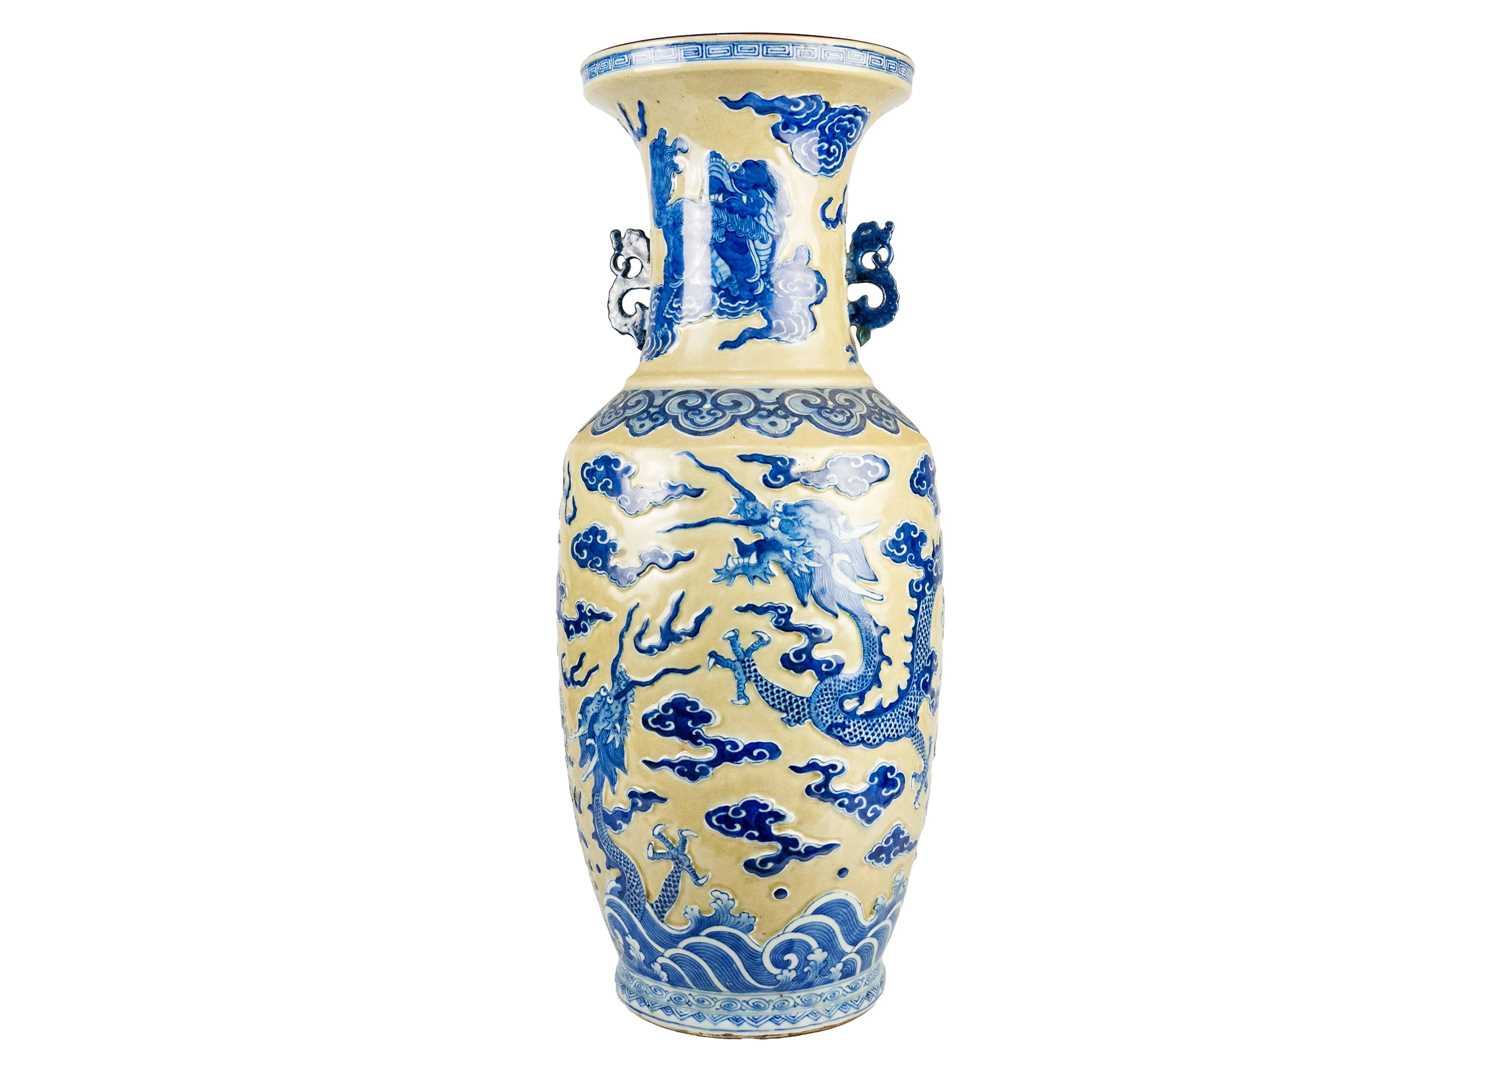 A large Chinese floor standing baluster 'dragon' vase, late 19th century.